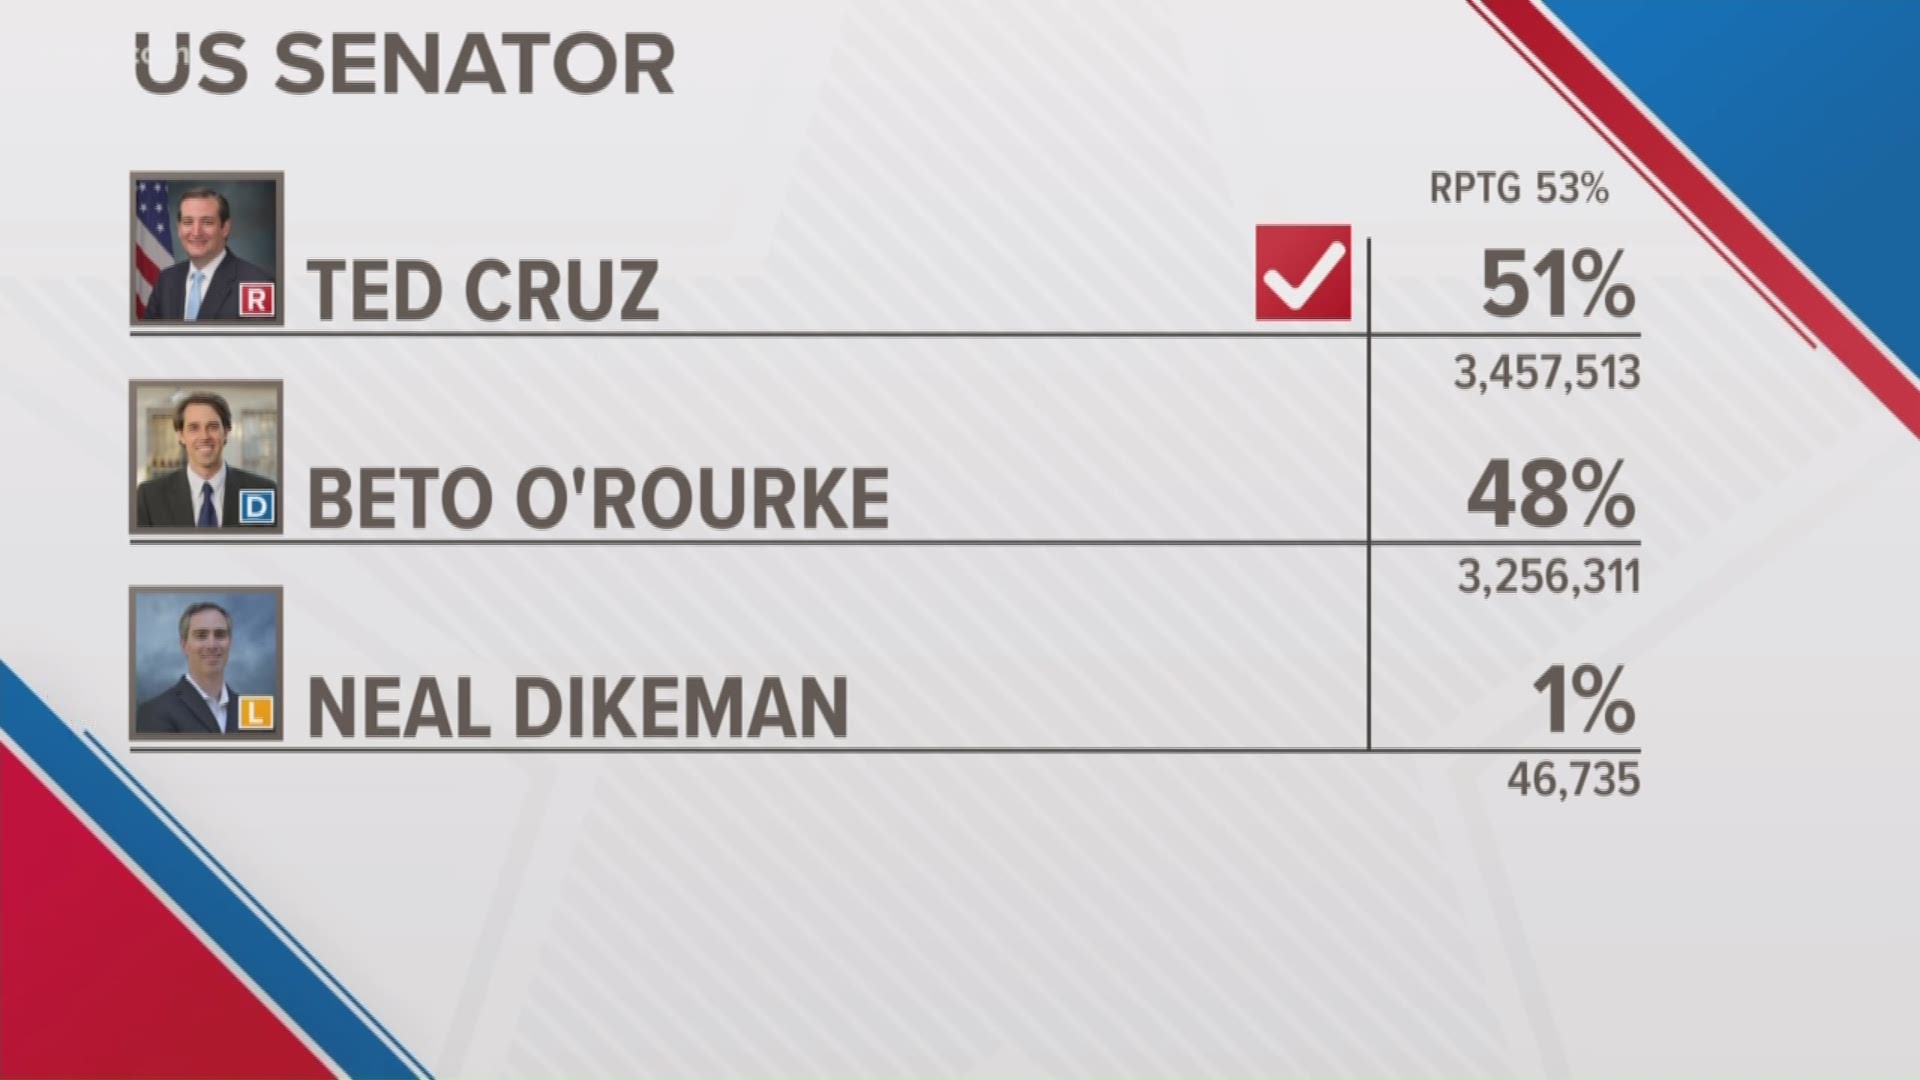 Sen. Ted Cruz (R) has claimed a victory over Beto O'Rourke (D) in the U.S. Senate race.